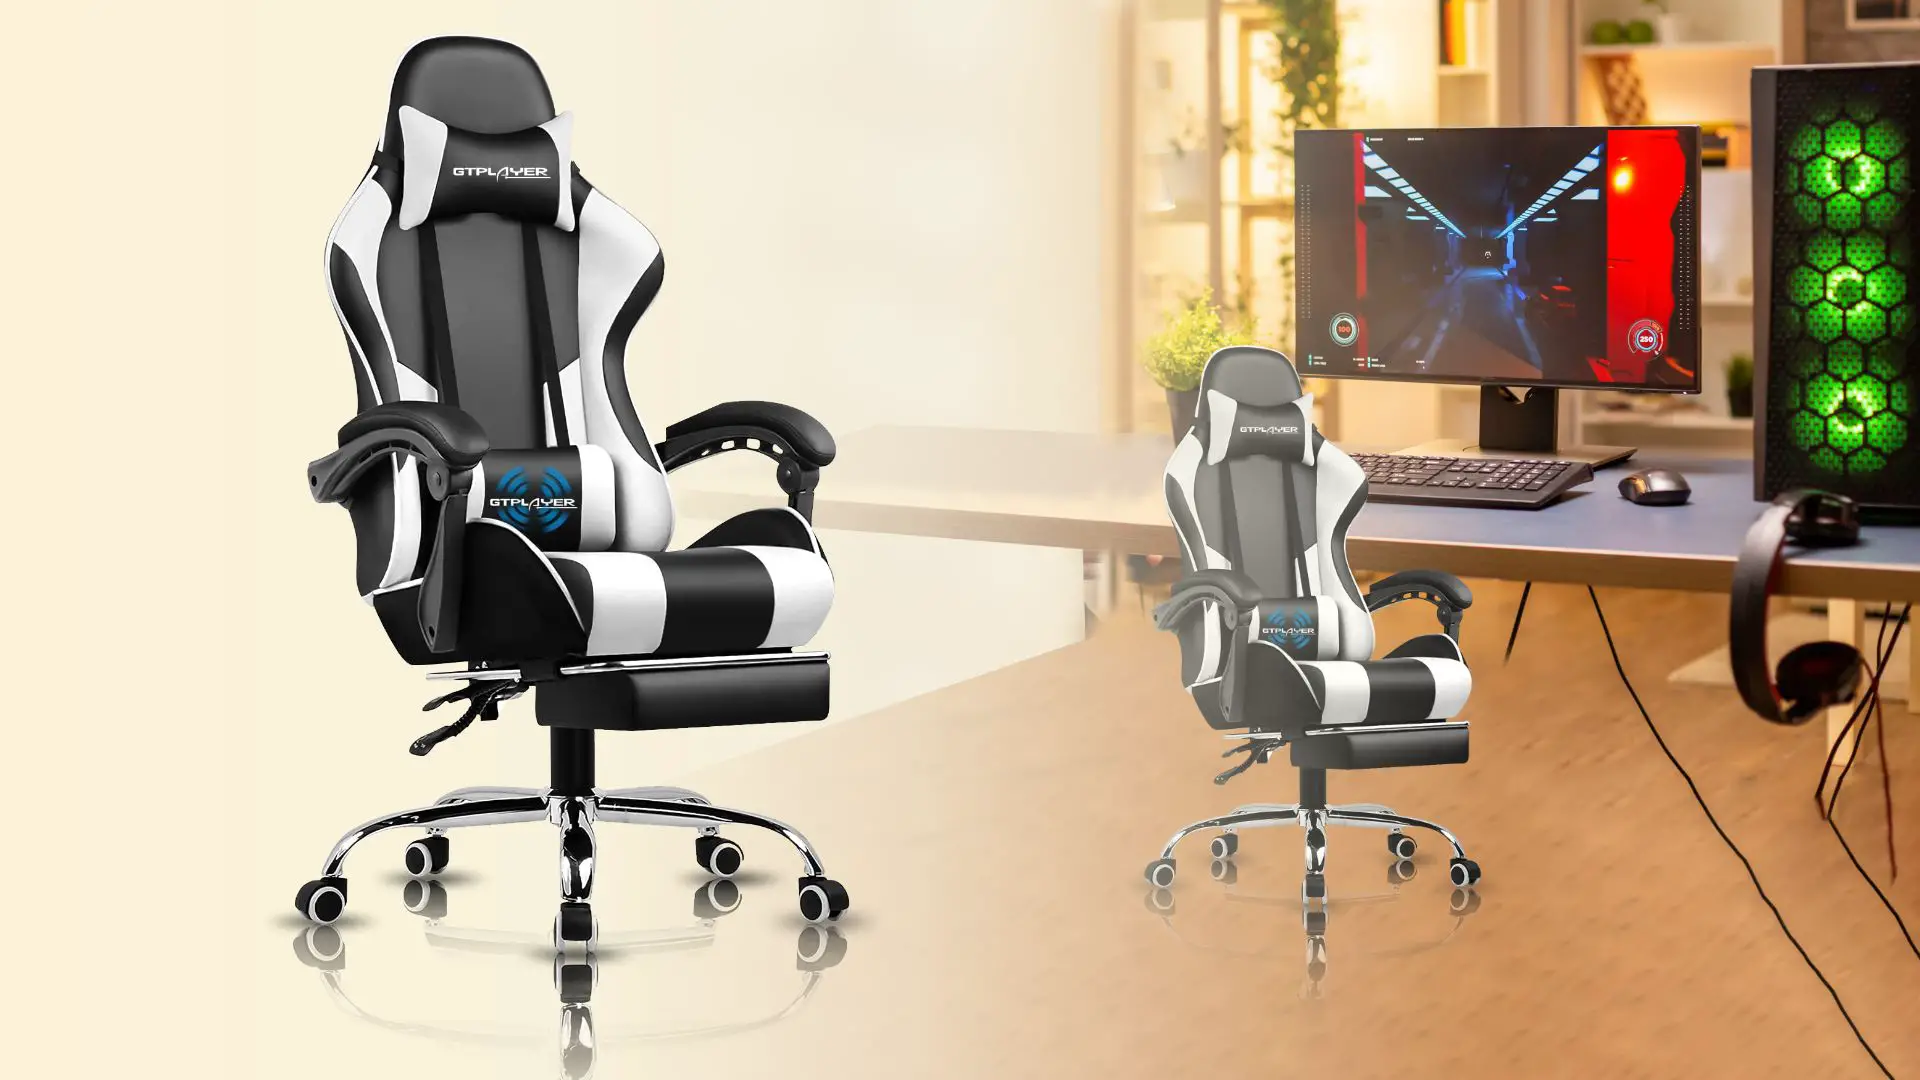 4.GTPLAYER Gaming Chair